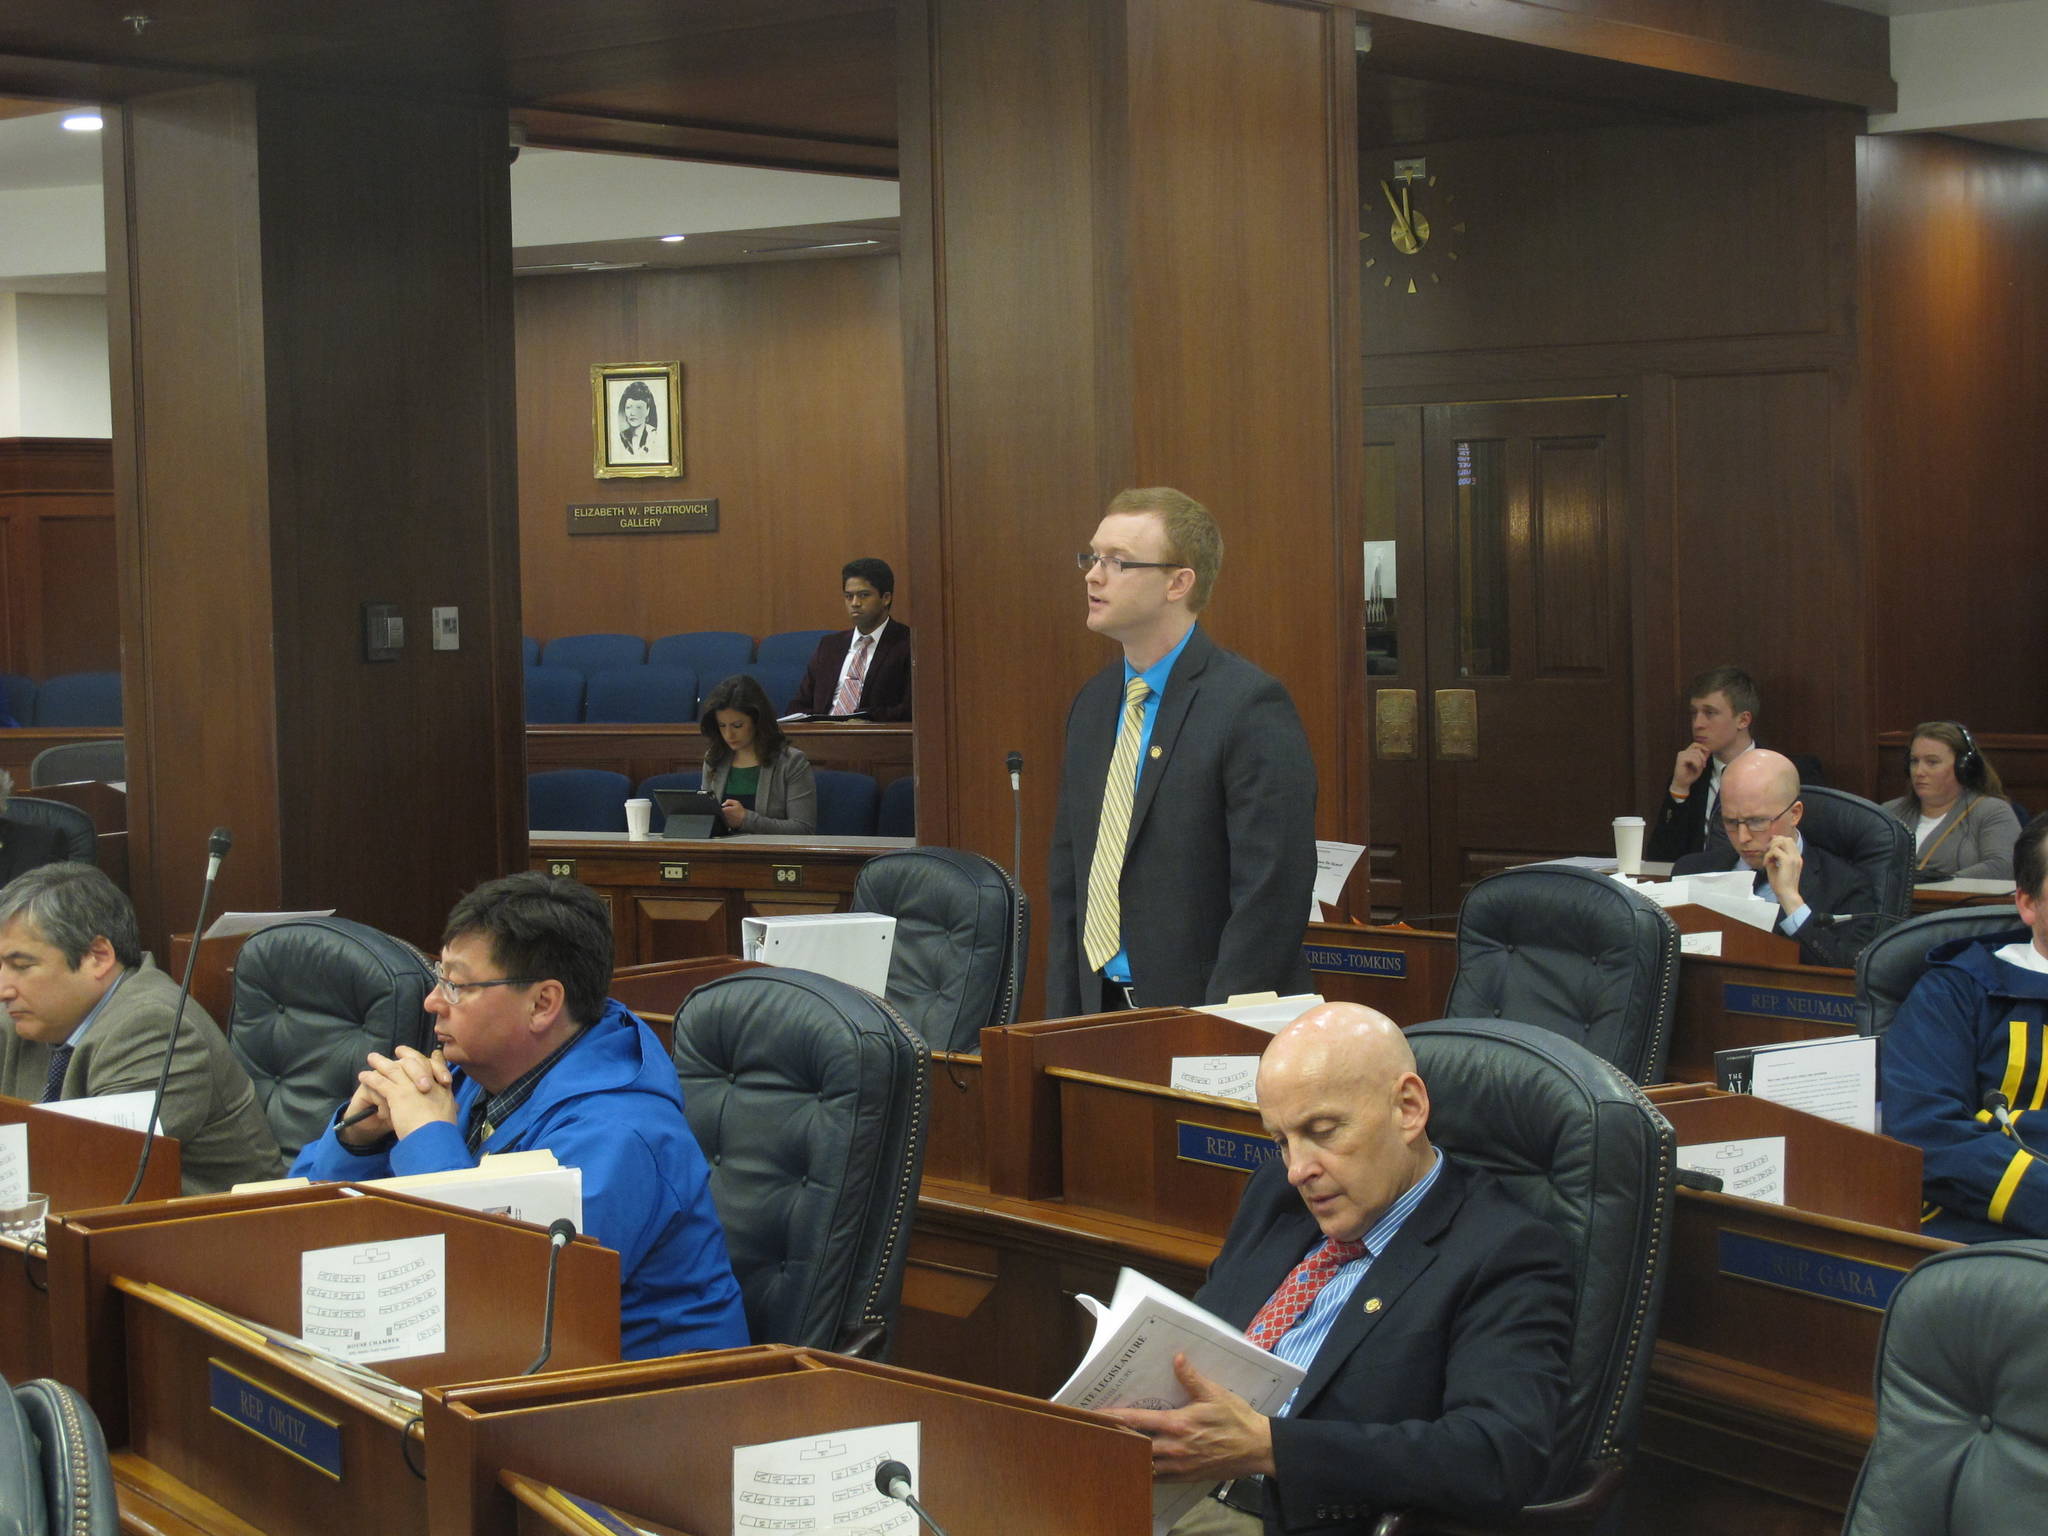 State Rep. David Eastman, standing, speaks on the floor of the House on Friday in Juneau. Eastman, a Republican from Wasilla, has come under pressure from fellow House members to apologize for comments he recently made about abortion. (Becky Bohrer | The Associated press)